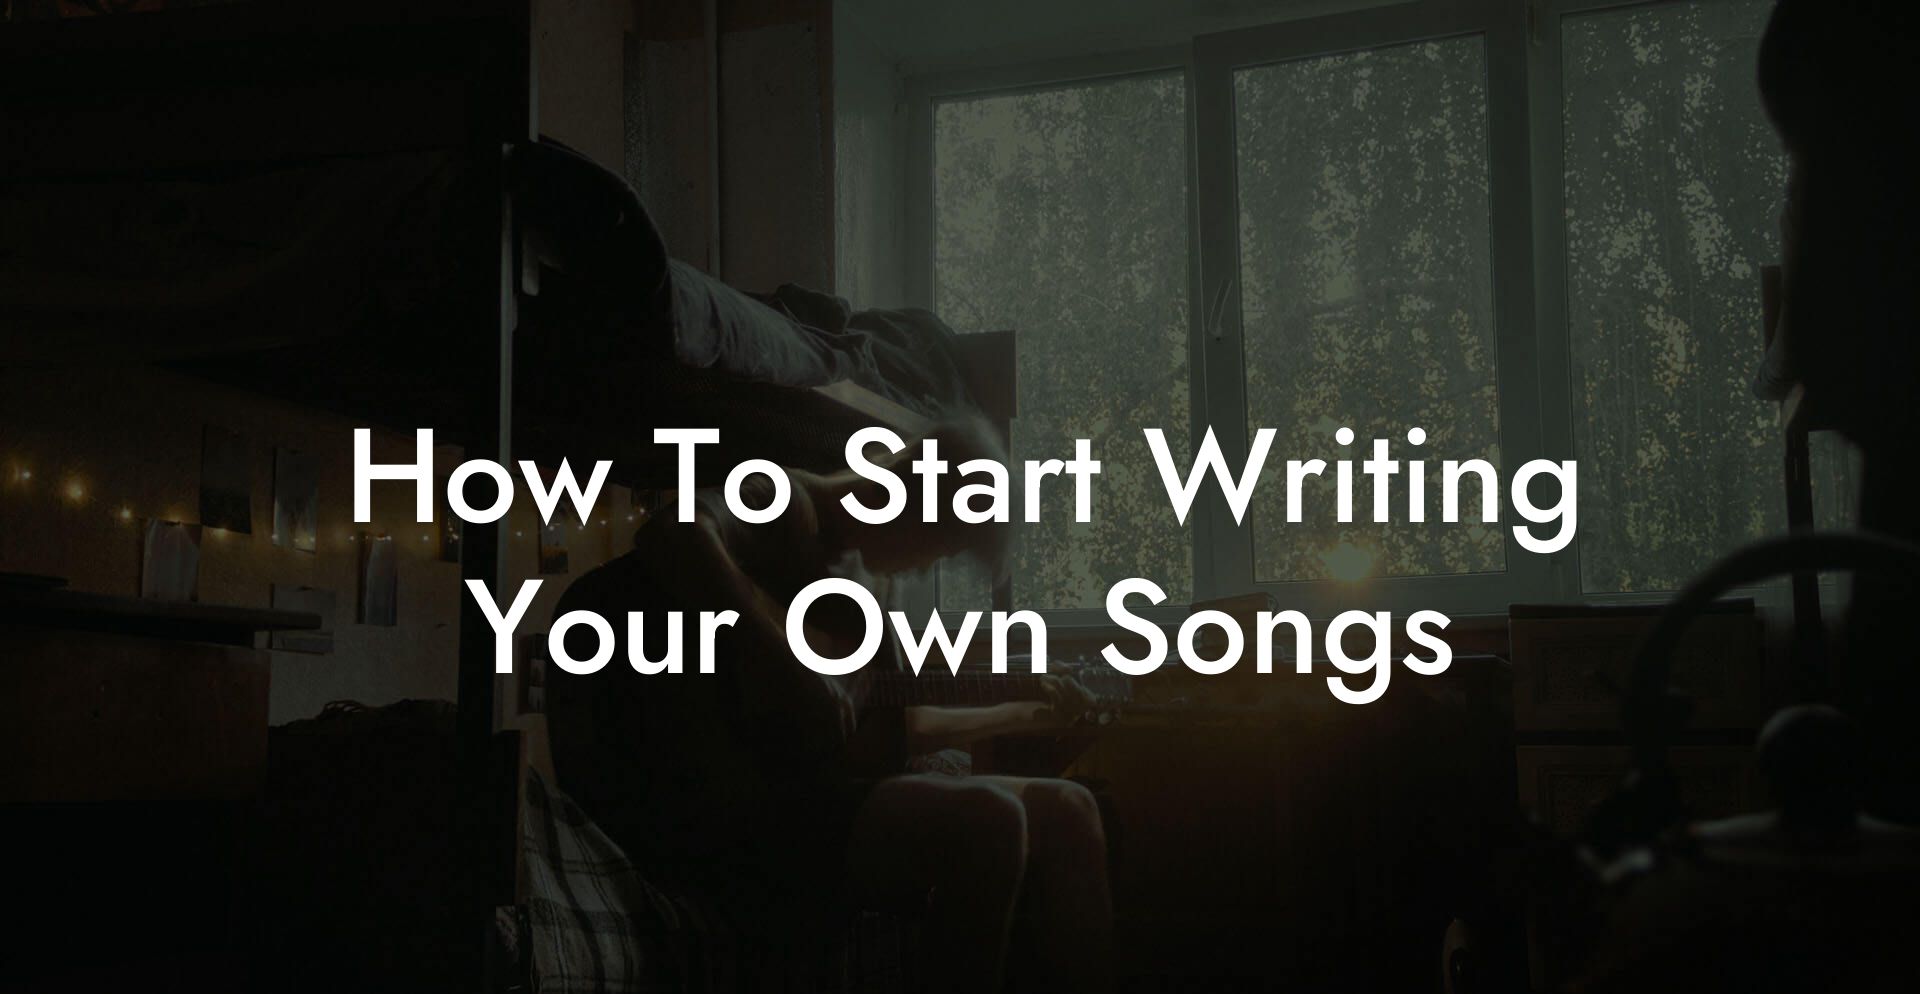 how to start writing your own songs lyric assistant